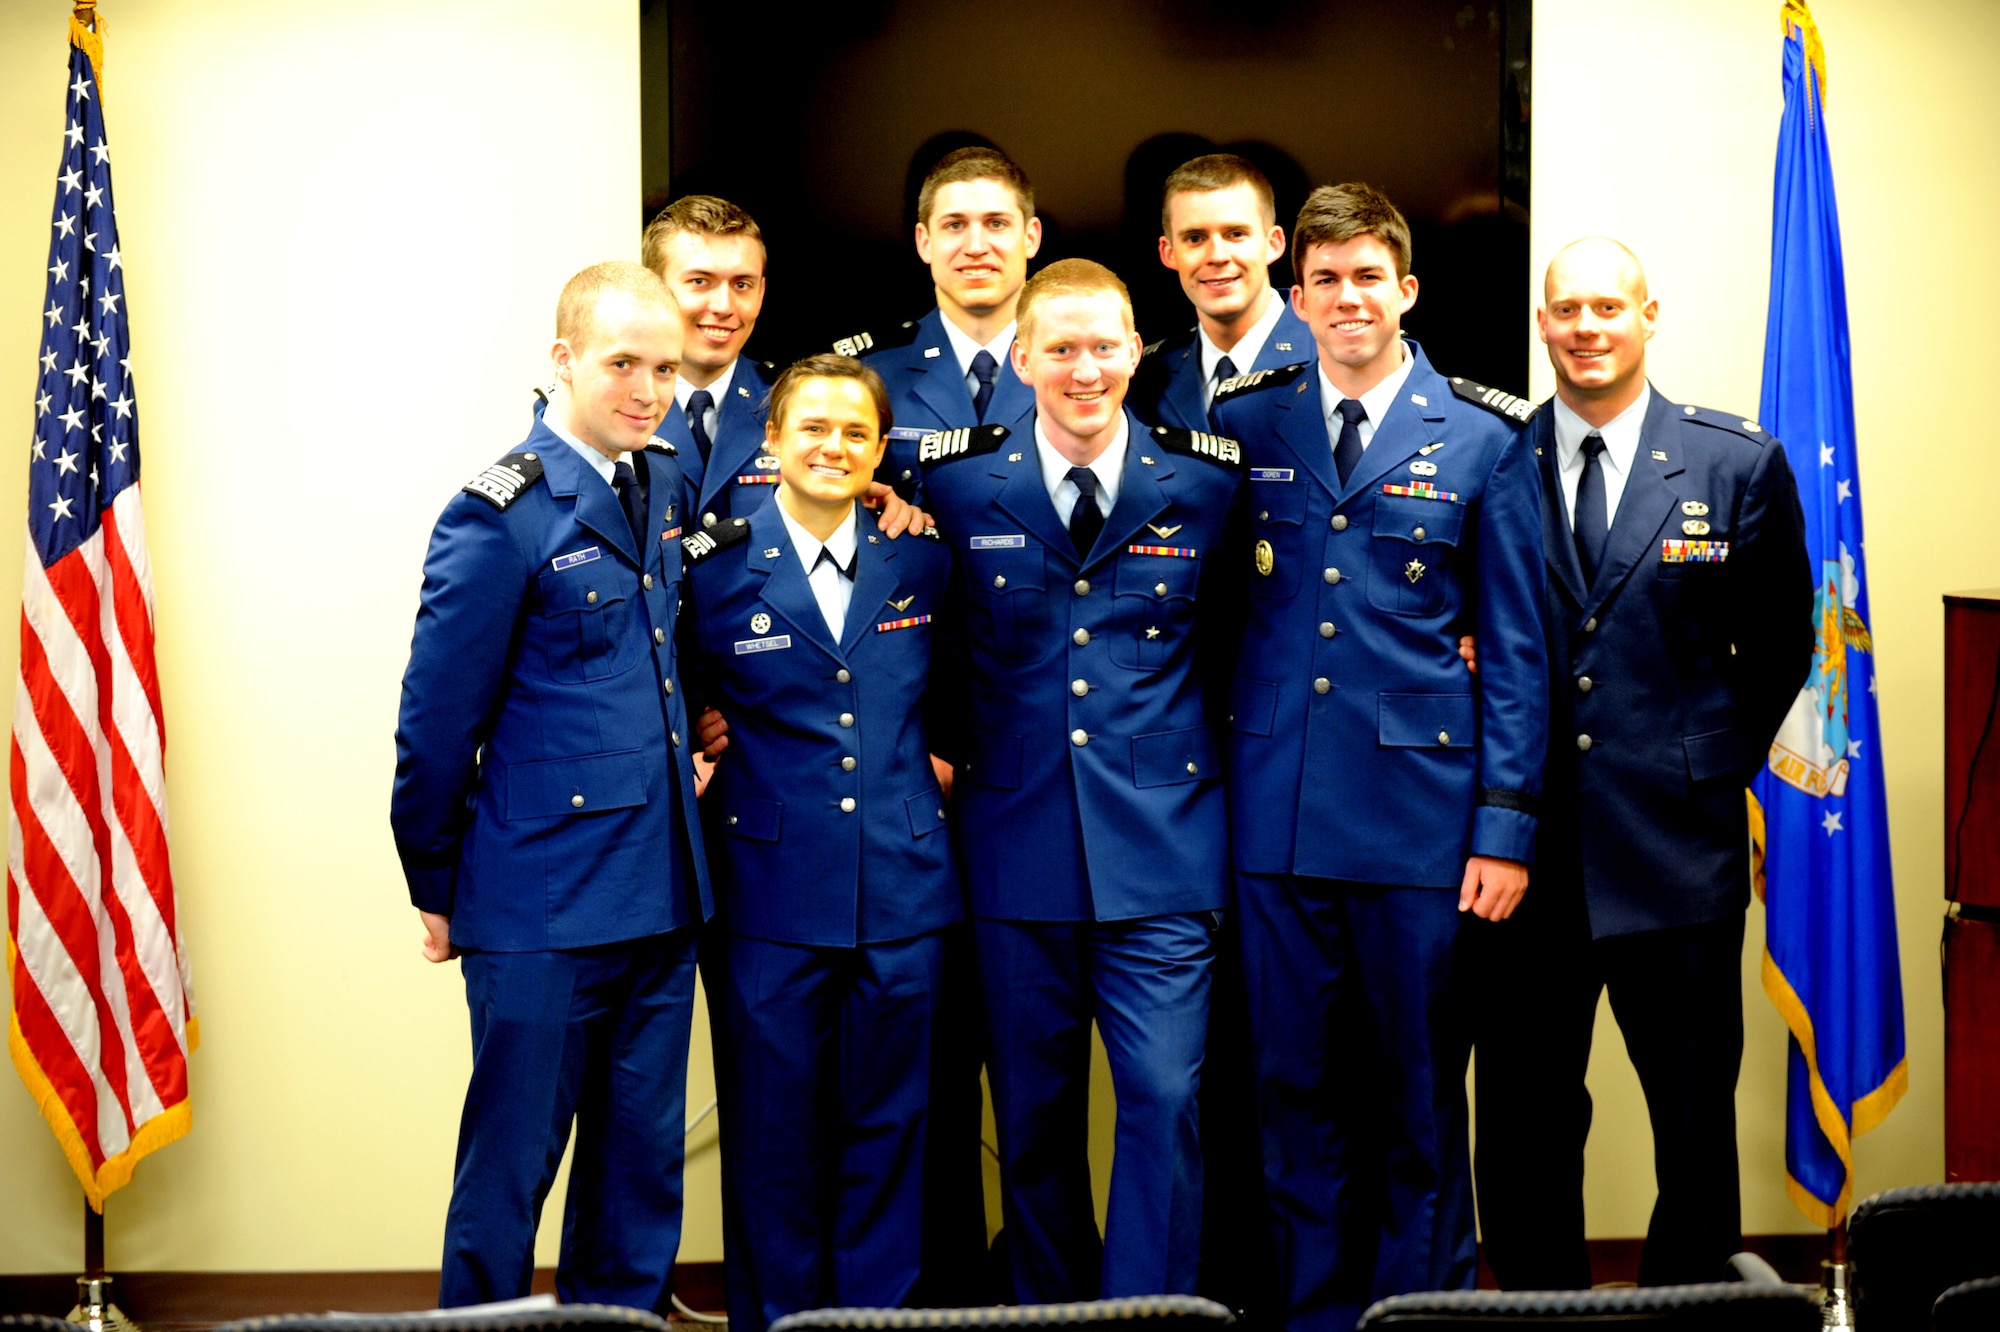 Seven senior cadets from the Air Force Academy presented their final patient loading prototype to 375th Aeromedical Evacuation Squadron members May 3 at Scott AFB.  Back row: Jared Rillings, Matt Hein, Brad Phelan, Maj. Cody Rasmussen.  Front row: Fred Rath, Jenna Whetsel, Hayden Richards, Tyler Ogren. (U.S. Air Force Photo by Staff Sgt. Maria Bowman)